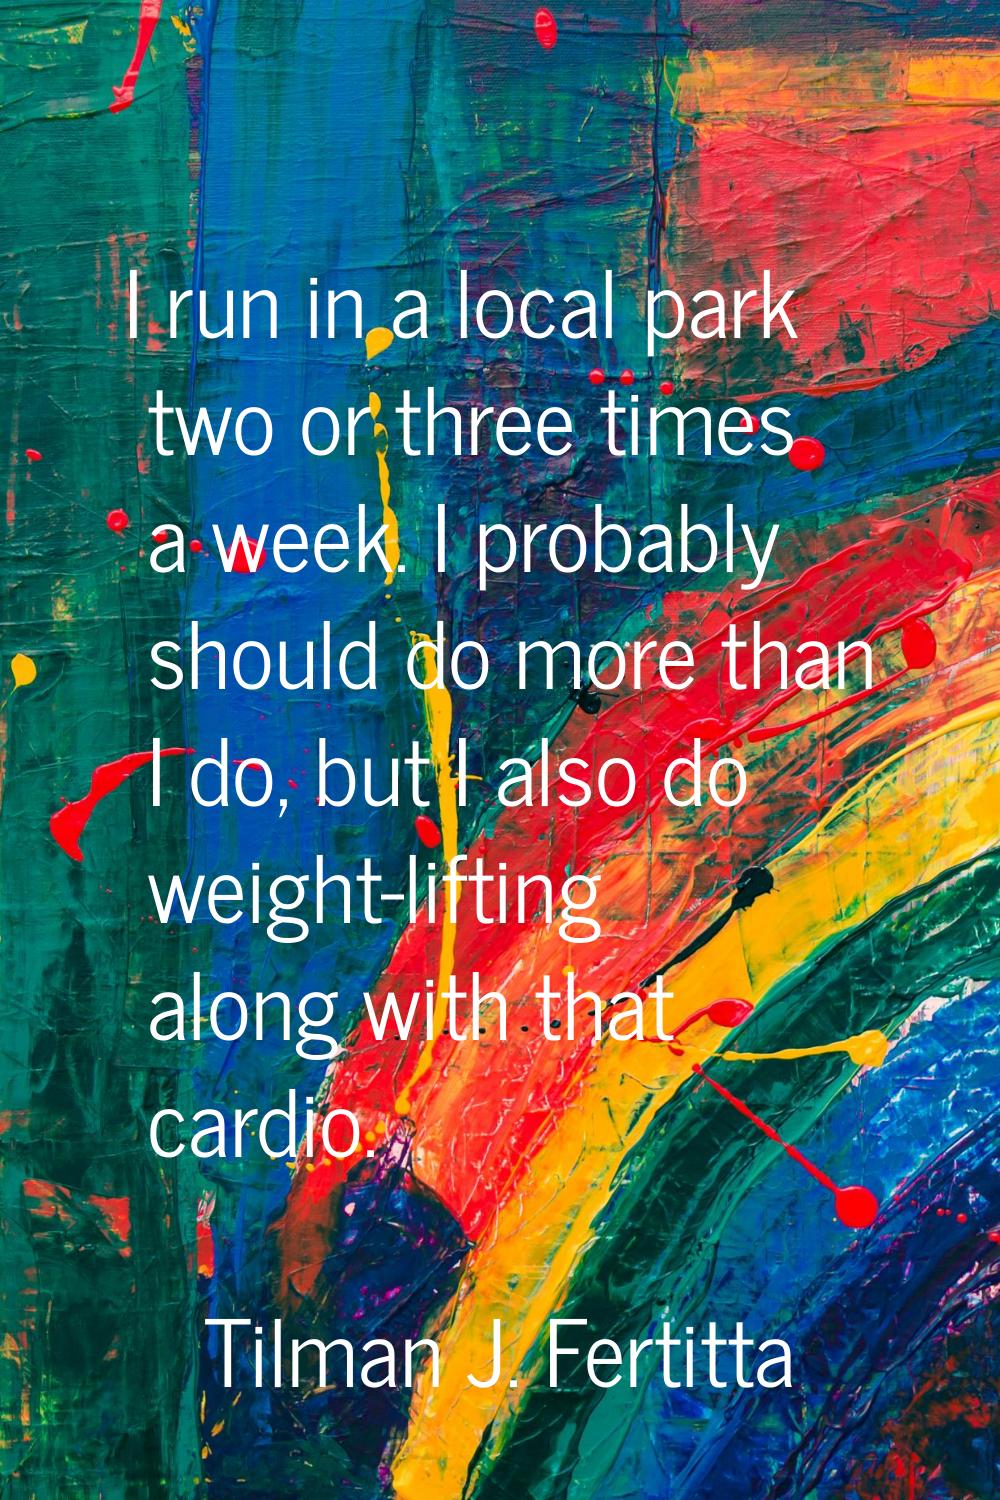 I run in a local park two or three times a week. I probably should do more than I do, but I also do